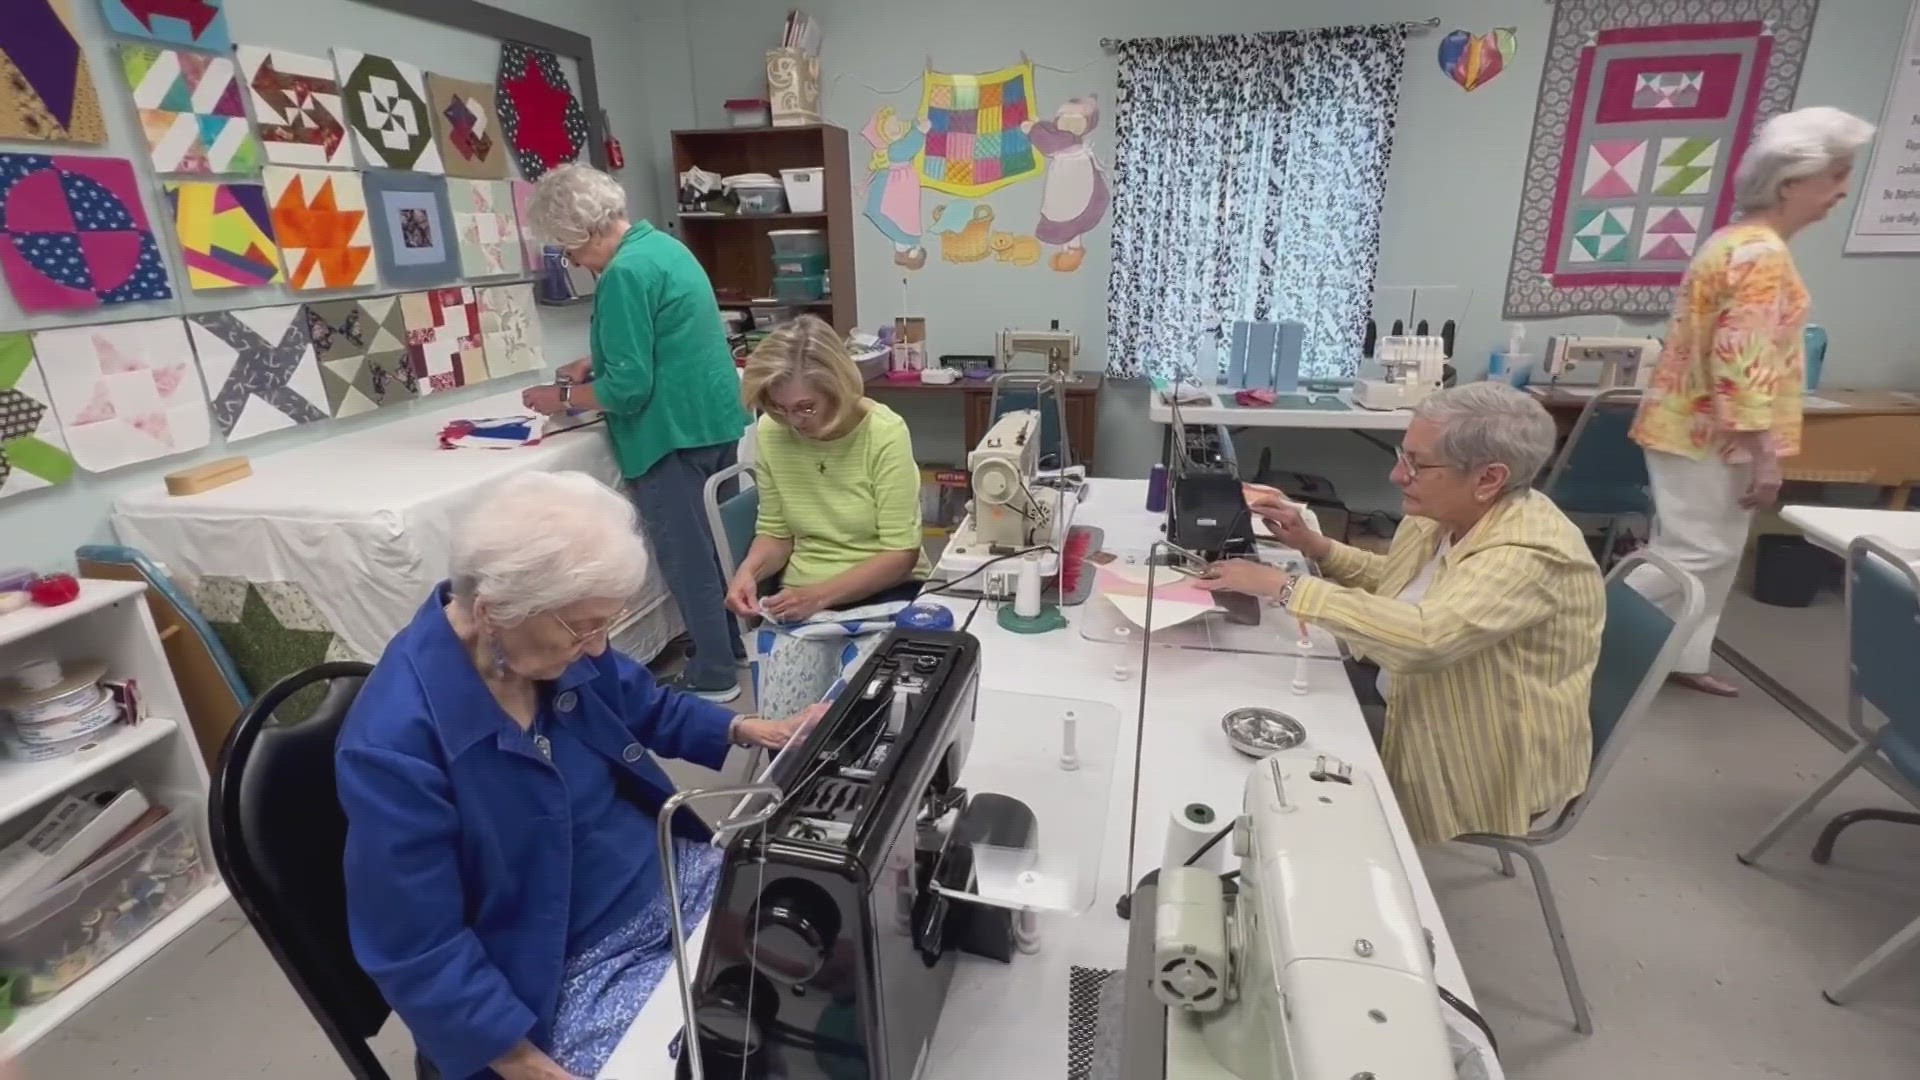 The group meets weekly and has made quilts for newborns, patients receiving dialysis, Alzheimer's patients and cancer patients.